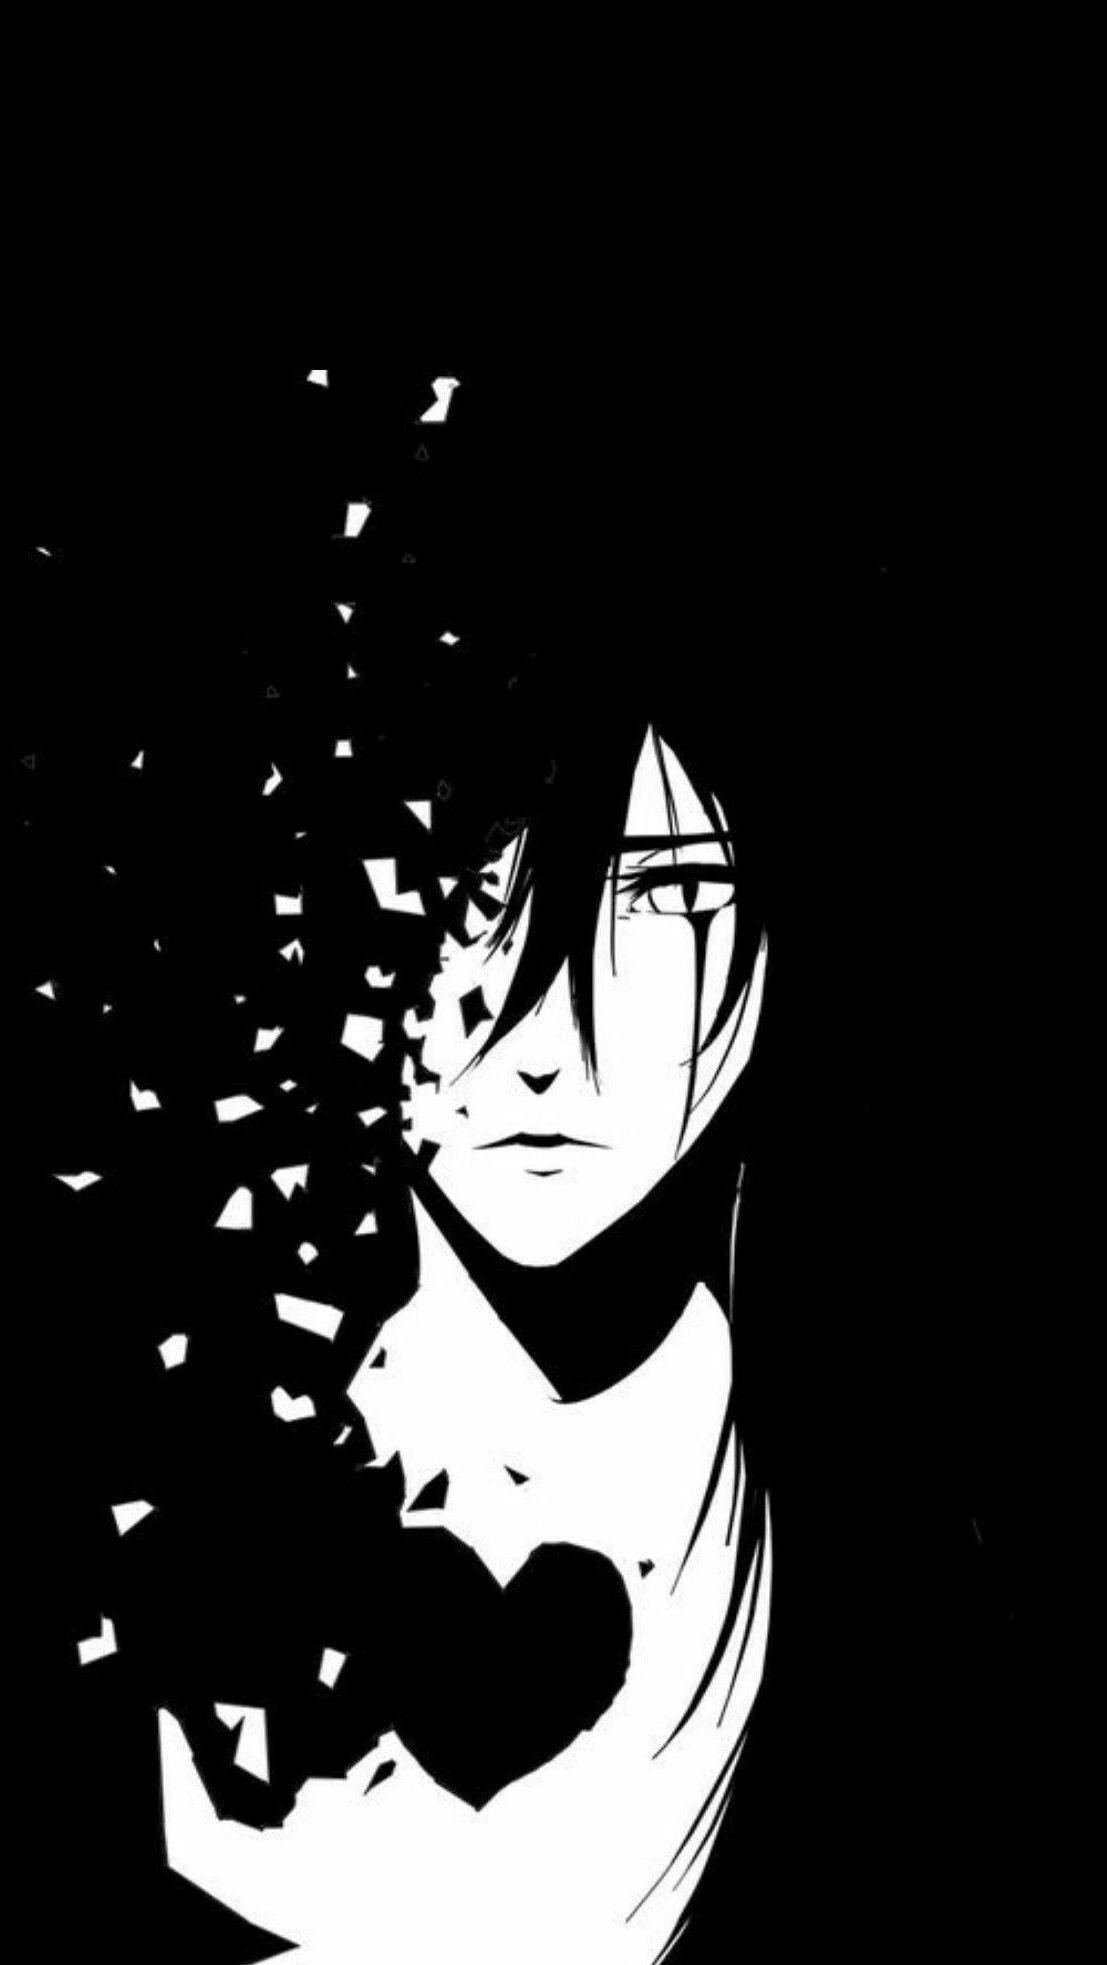 Black and White Anime iPhone Wallpapers - Top Free Black and White ...